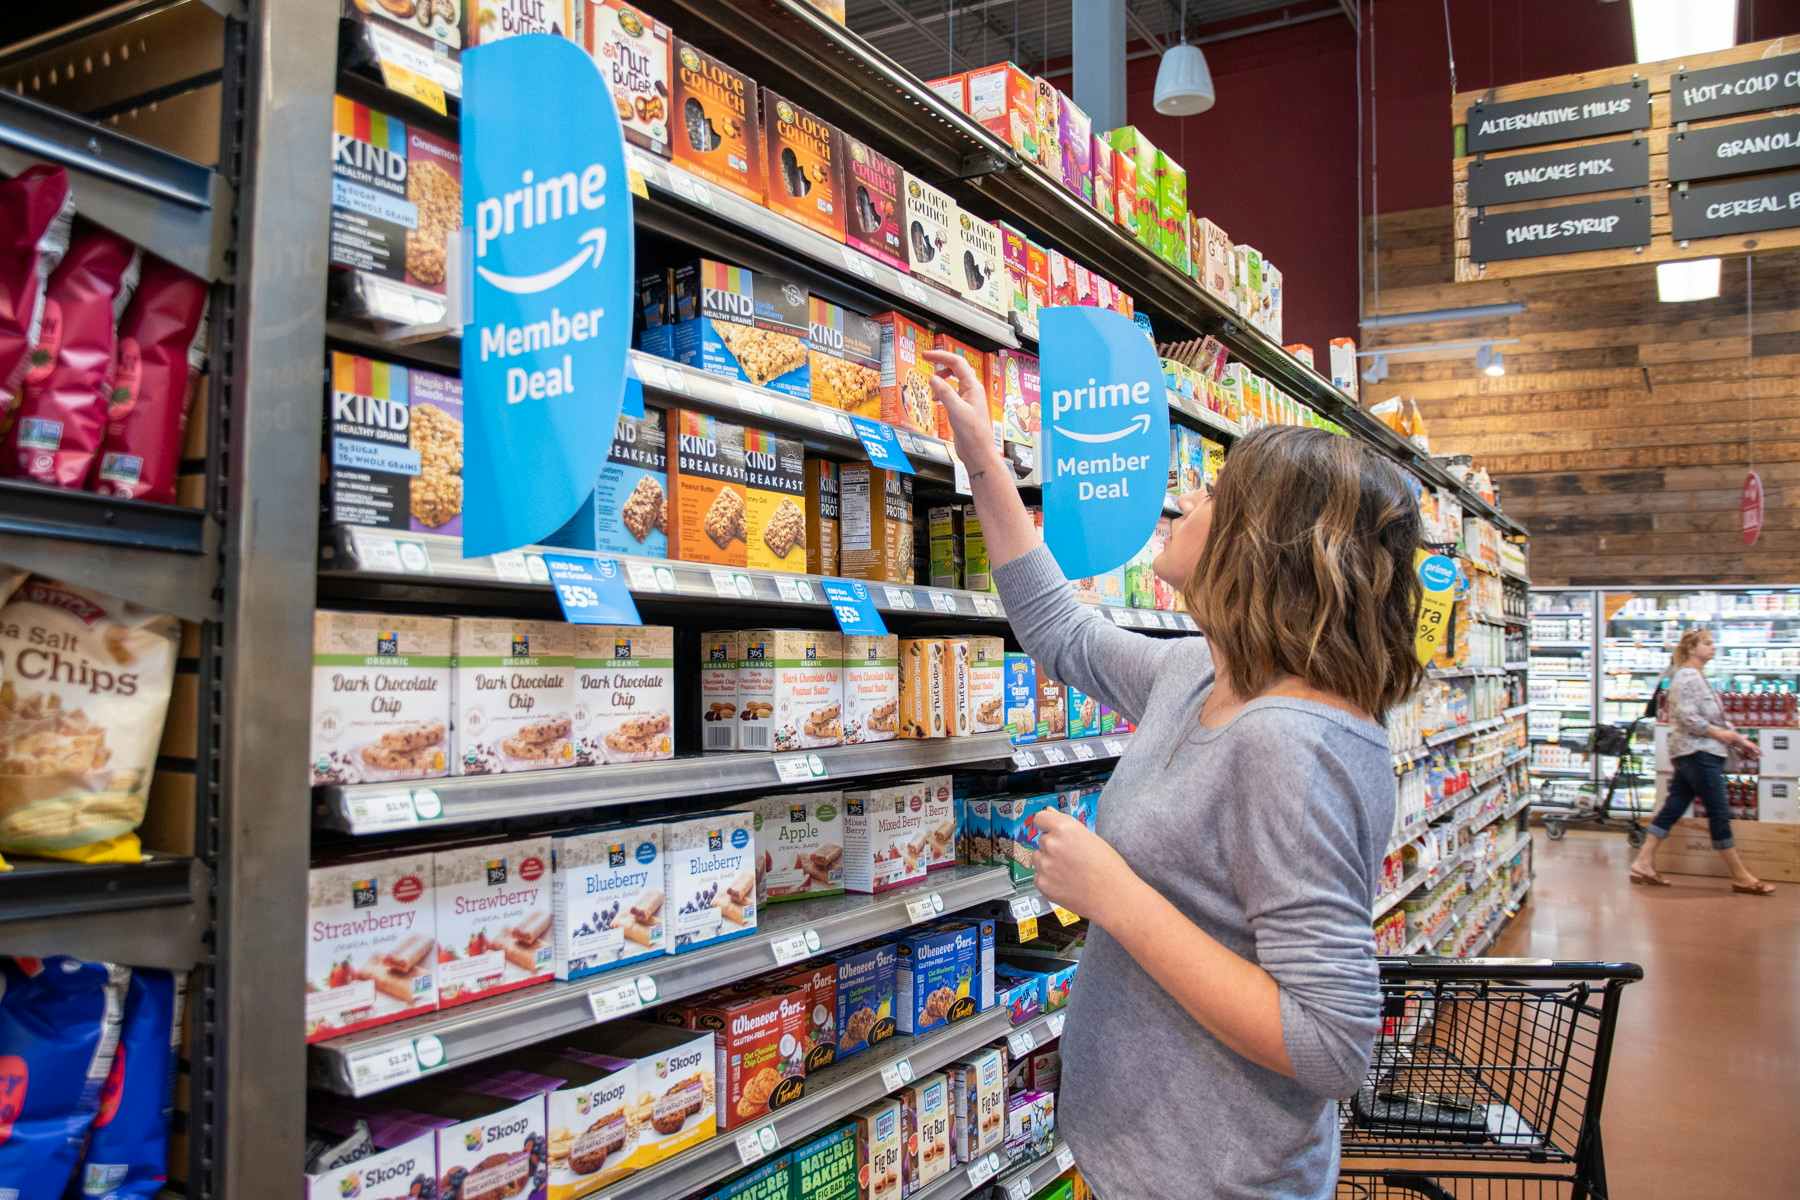 A woman shopping at Whole Foods, reaching up to a shelf tagged with blue Amazon Prime Members Deal signs.